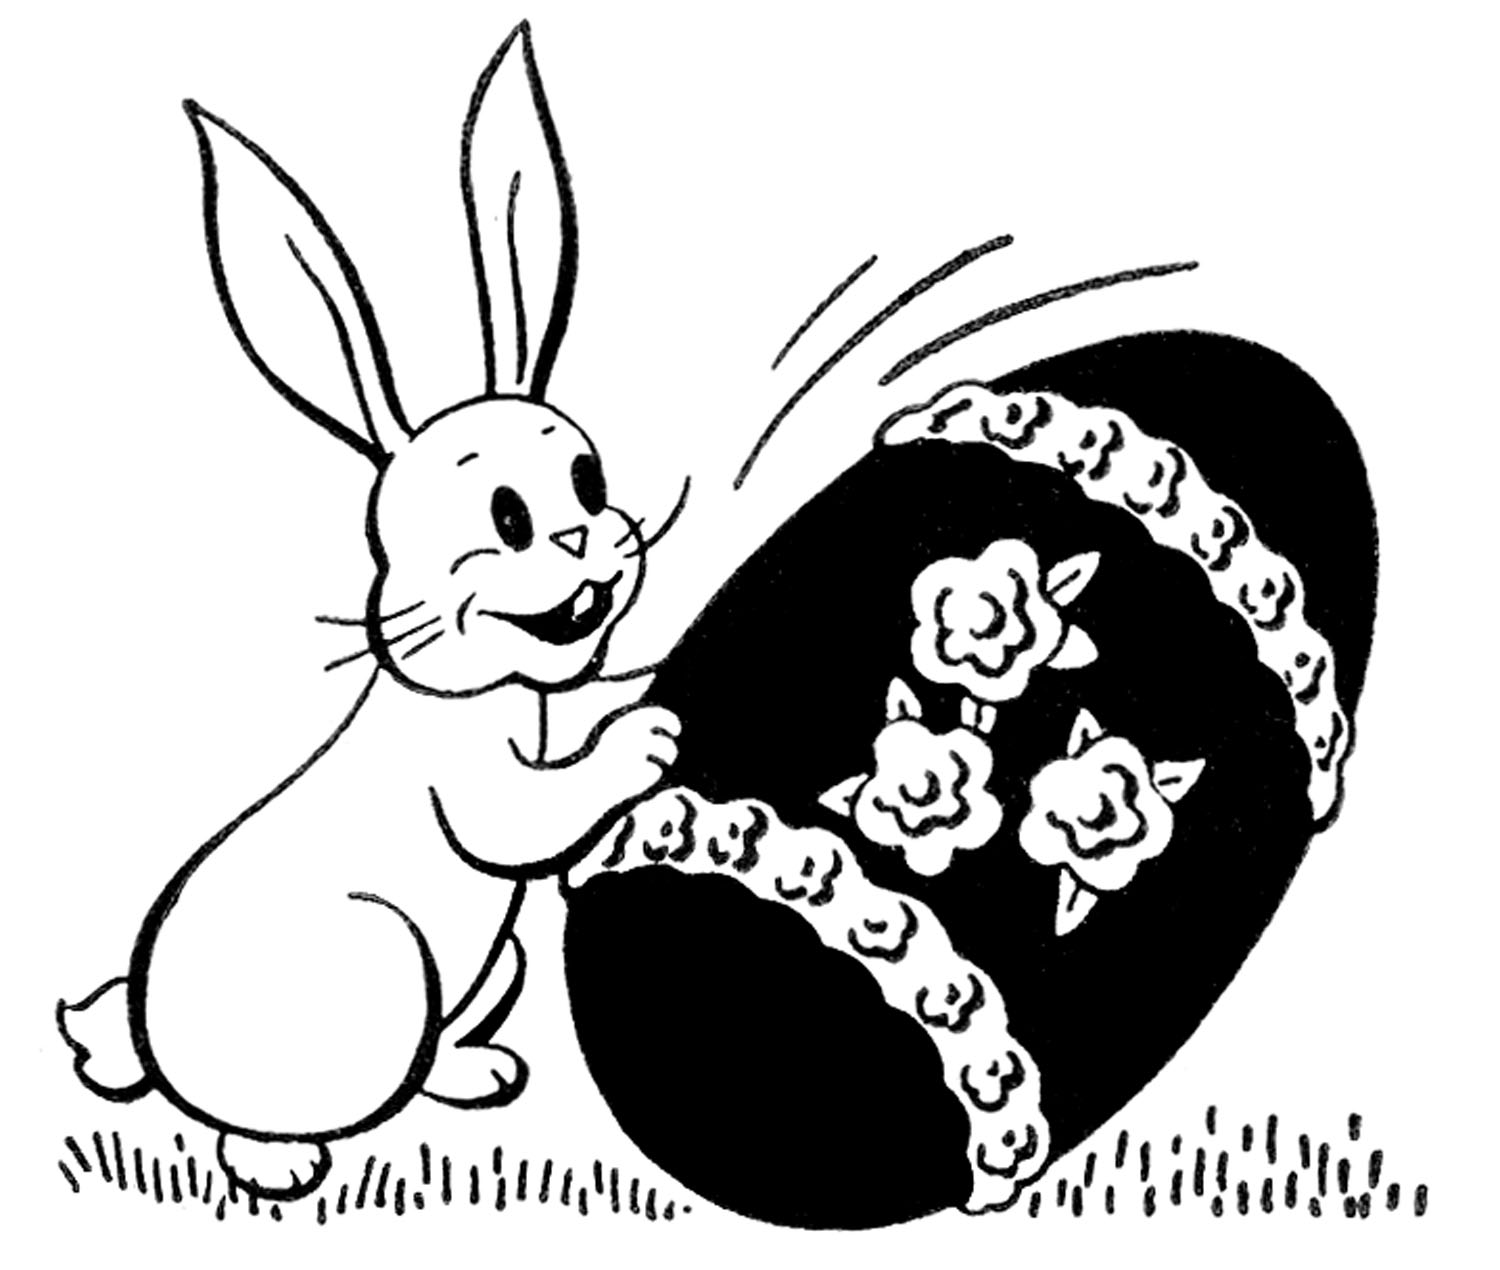 Retro Easter Images - Bunny with Candy Egg - The Graphics Fairy